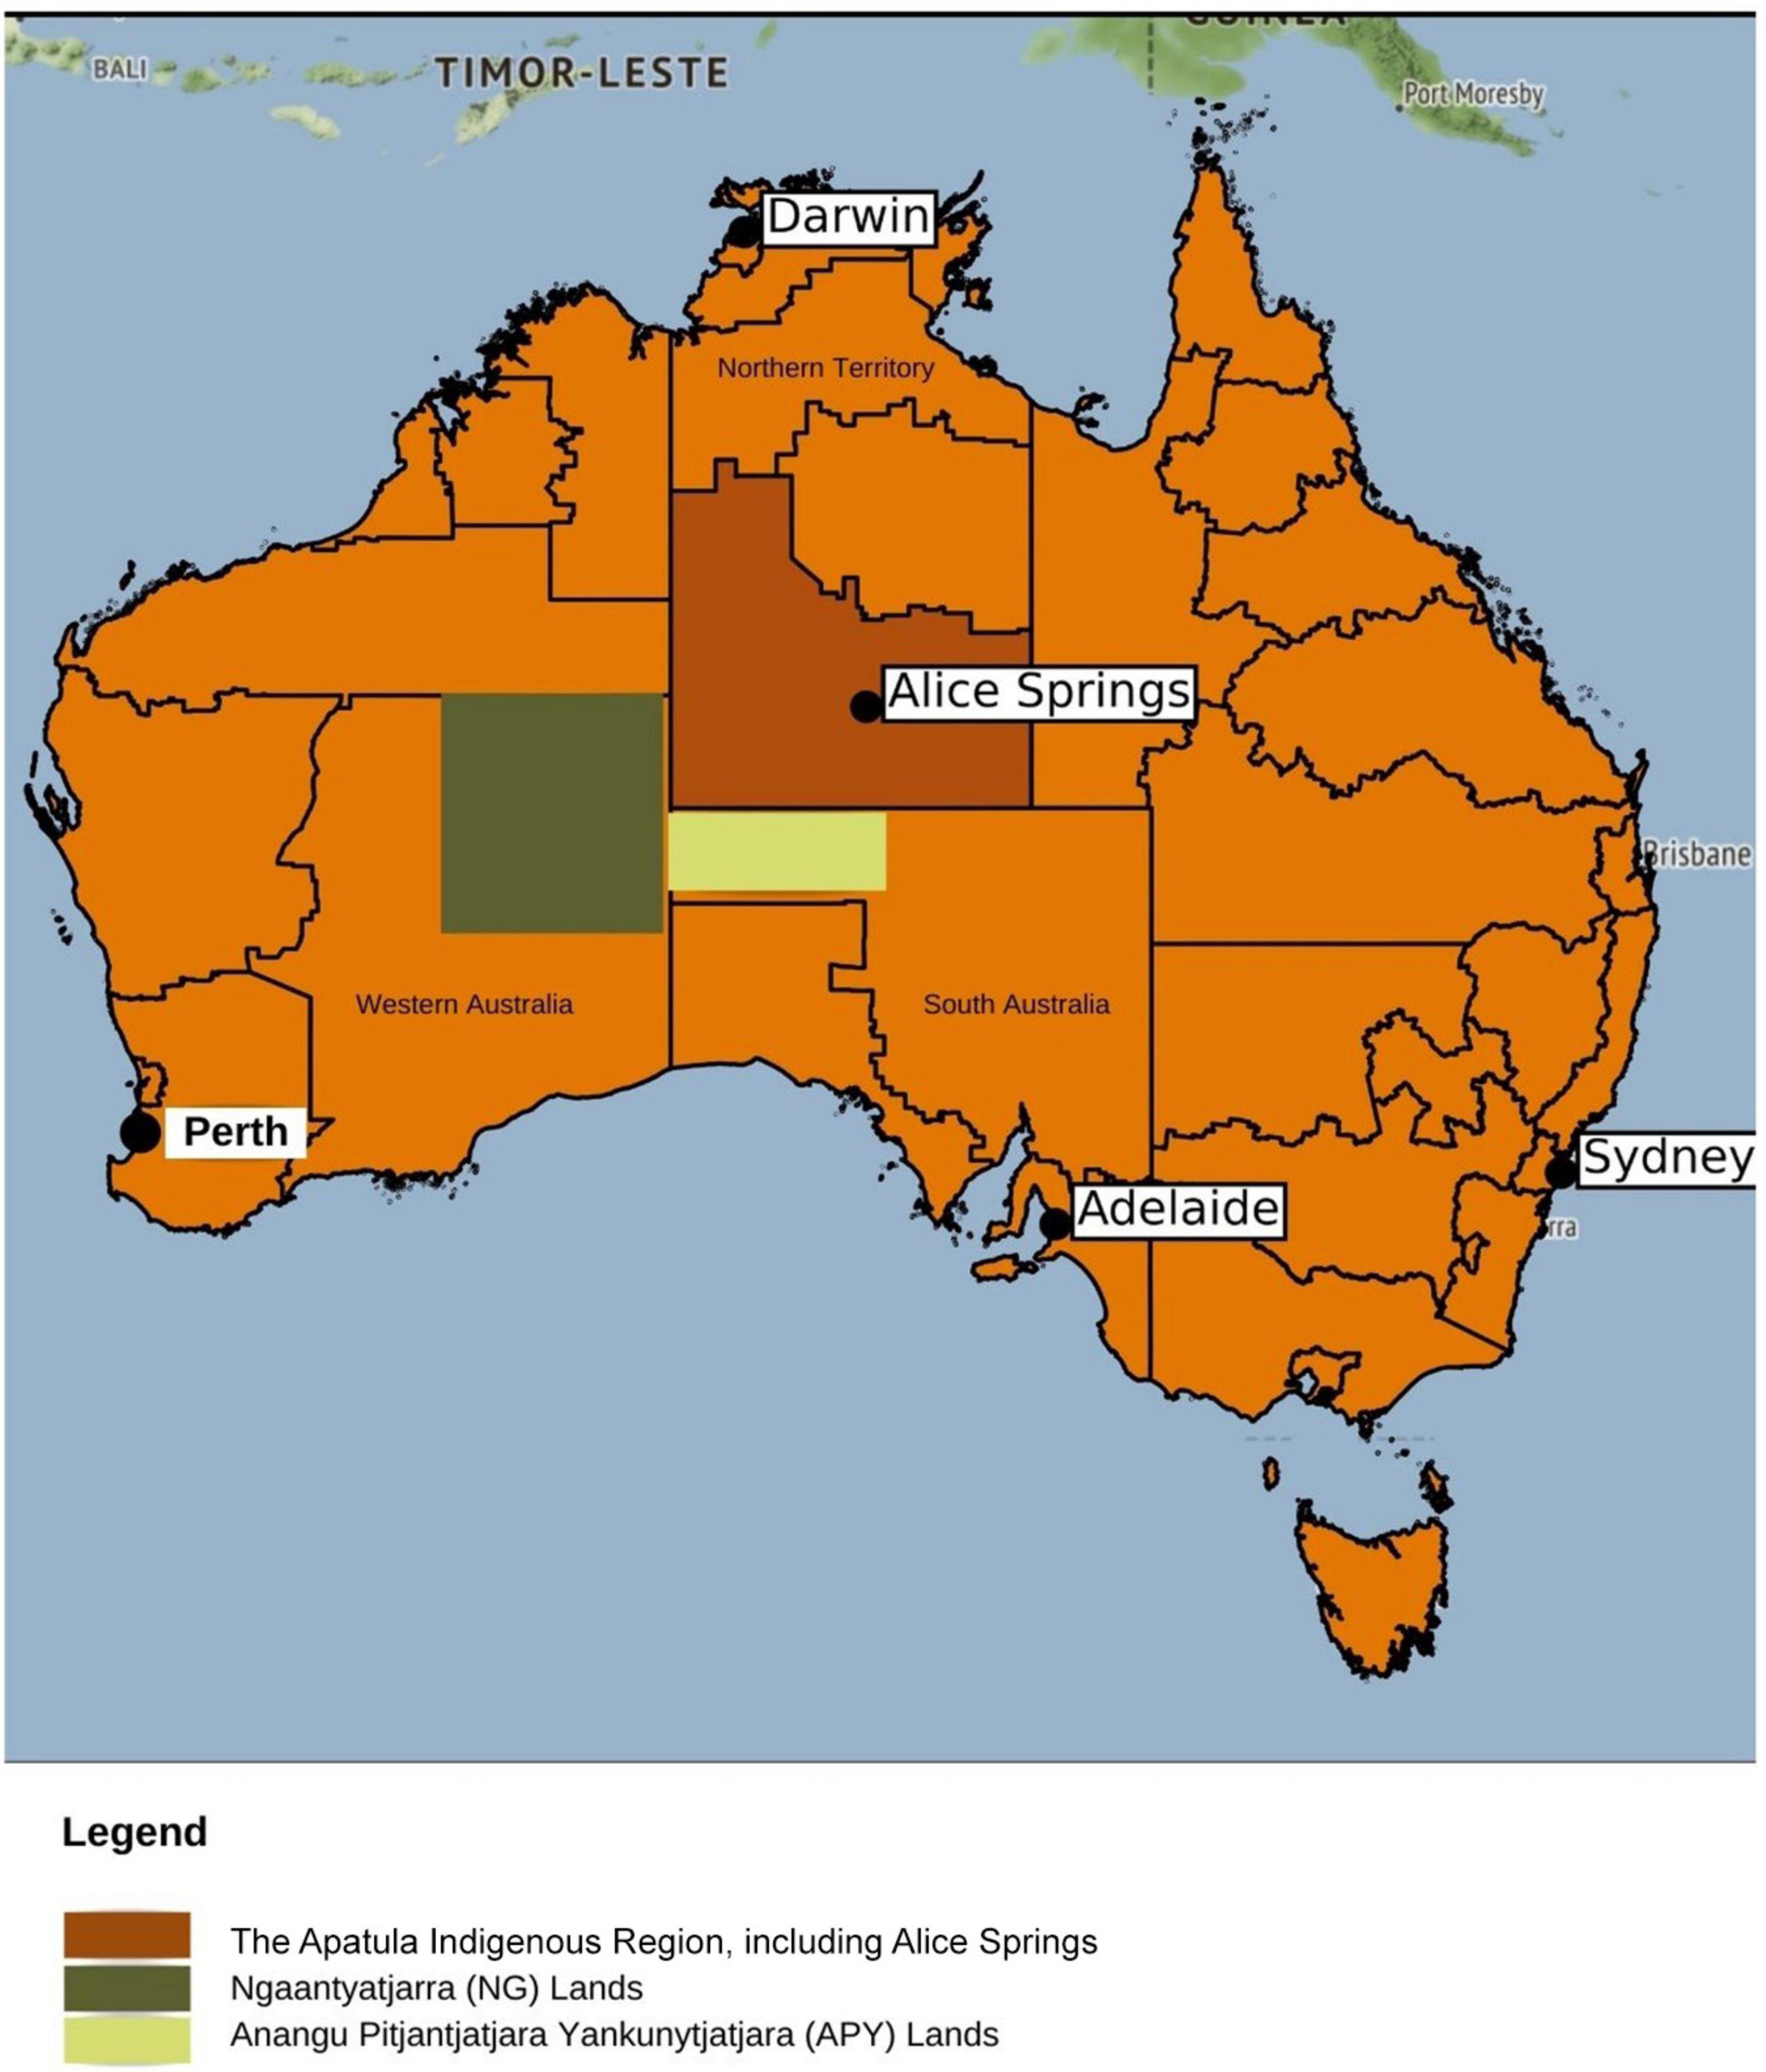 Frontiers A Qualitative Study Exploring Perceptions to the Human T Cell Leukaemia Virus Type 1 in Central Australia Barriers to Preventing Transmission in a Remote Aboriginal Population picture